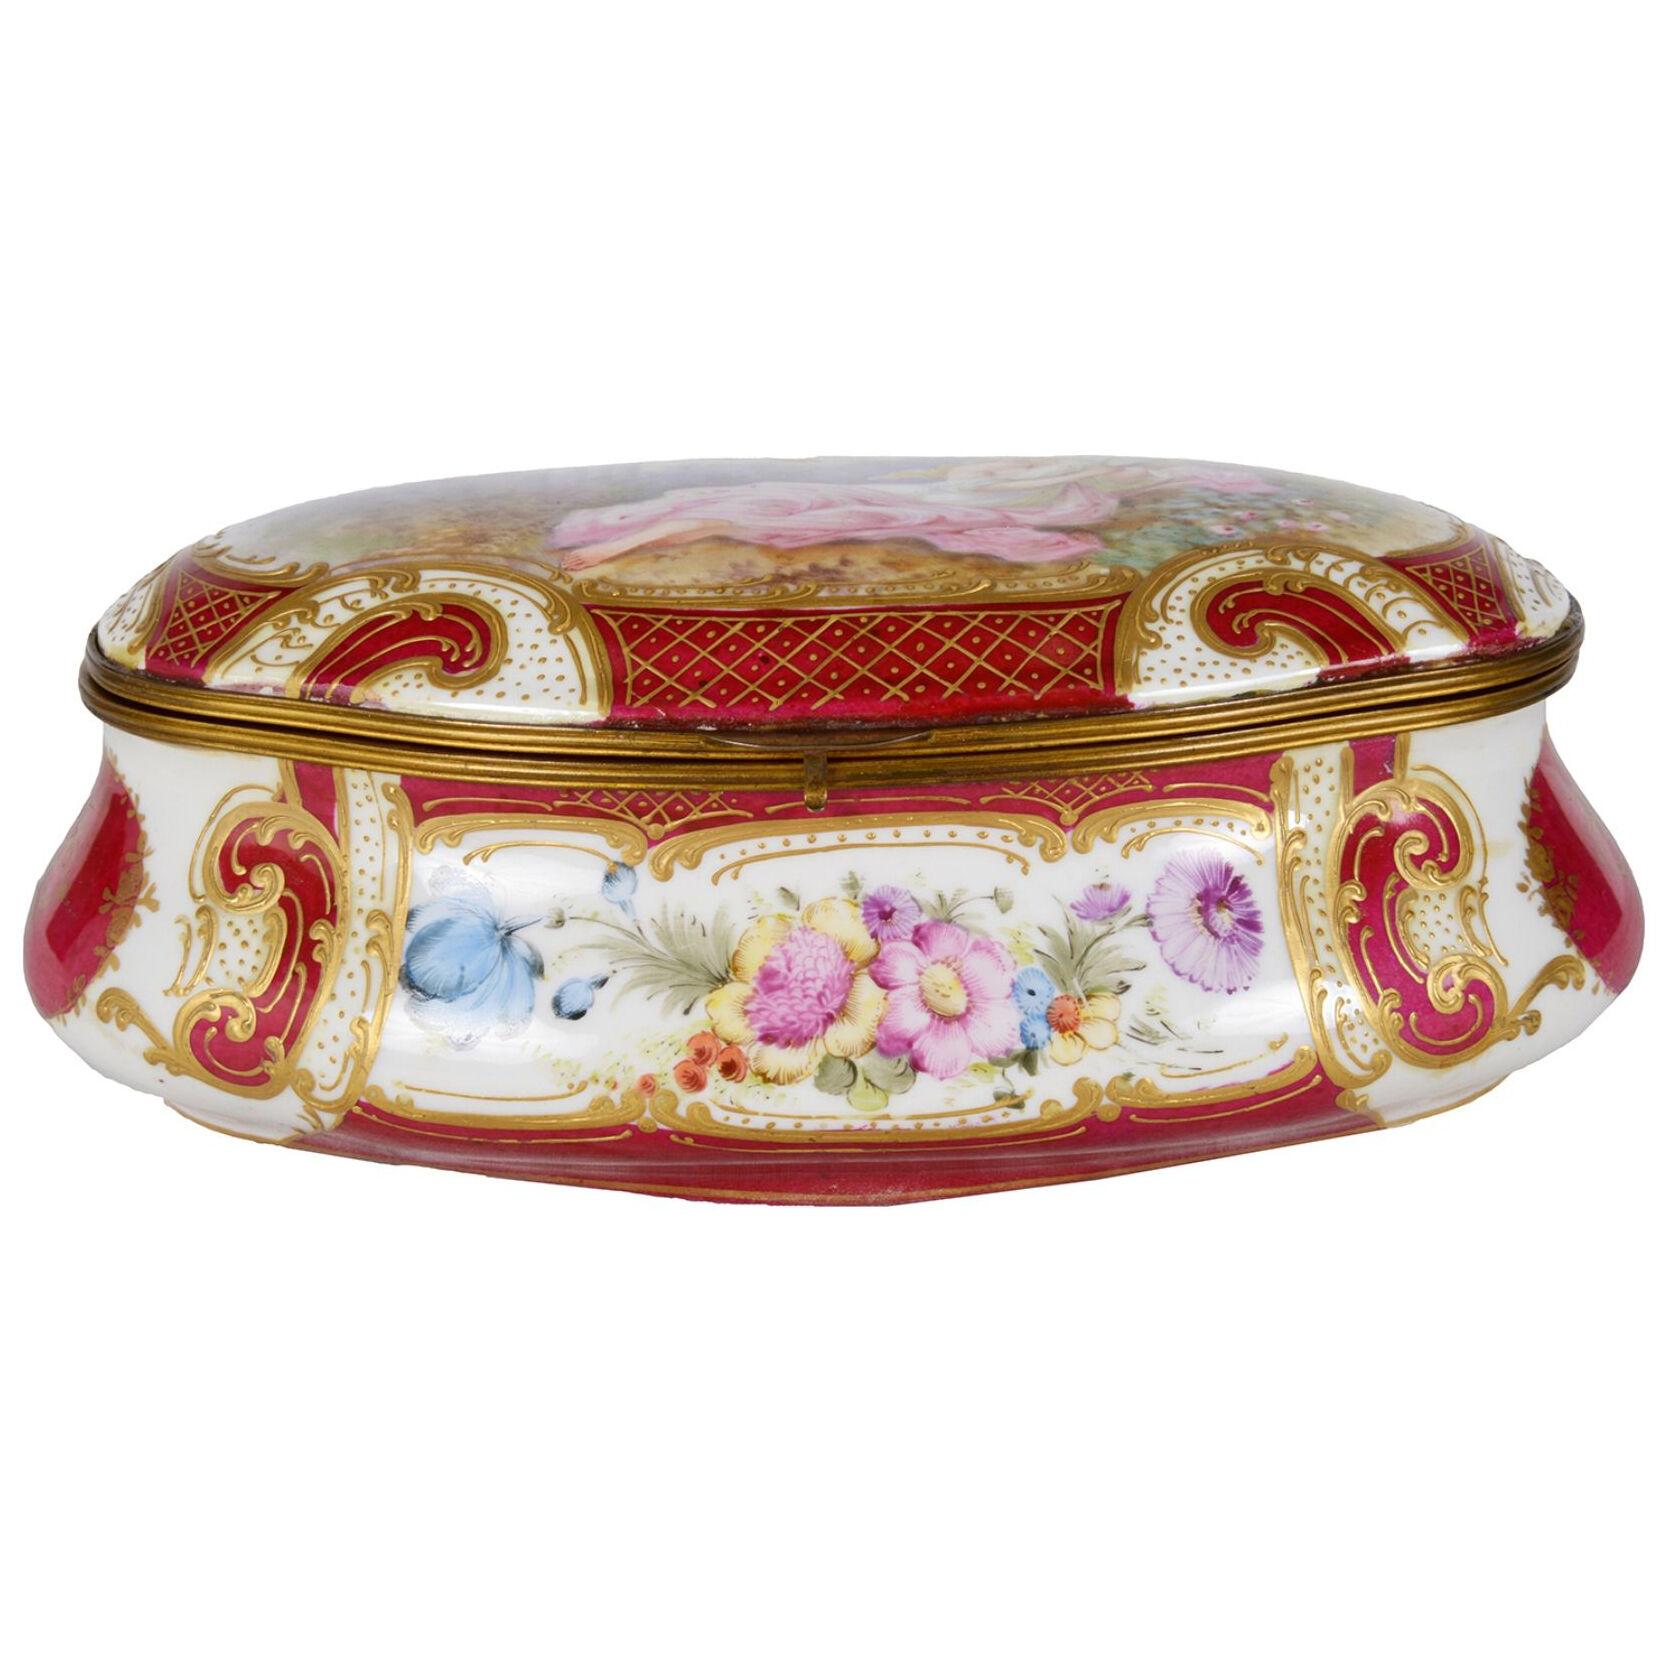 Late 19th Century French Sevres style porcelain casket.